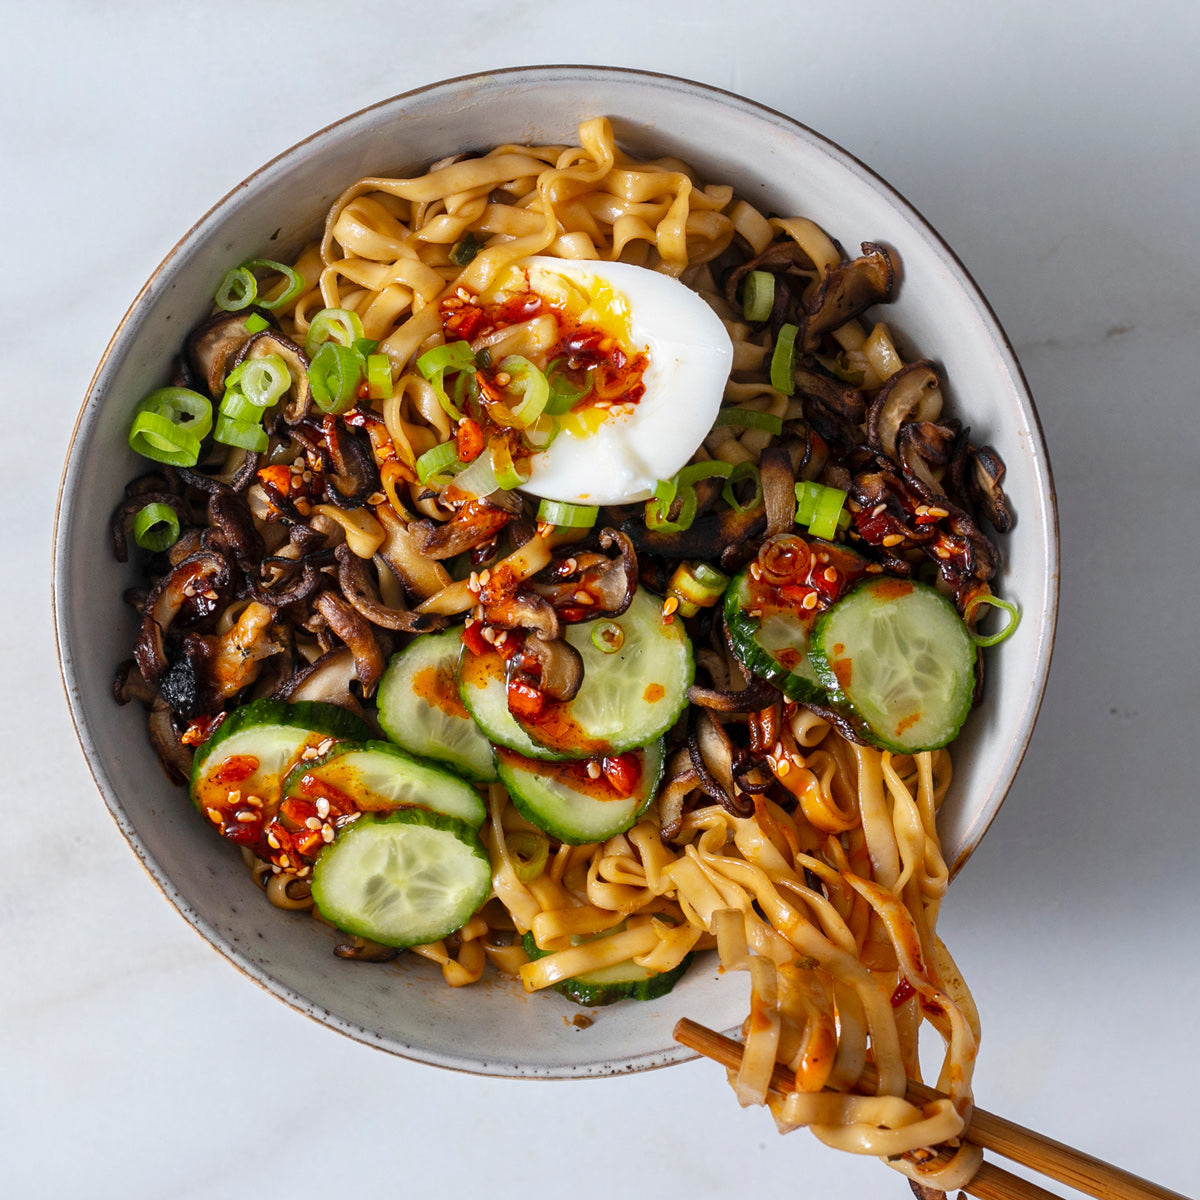 noodles with mushrooms, pickles, and egg